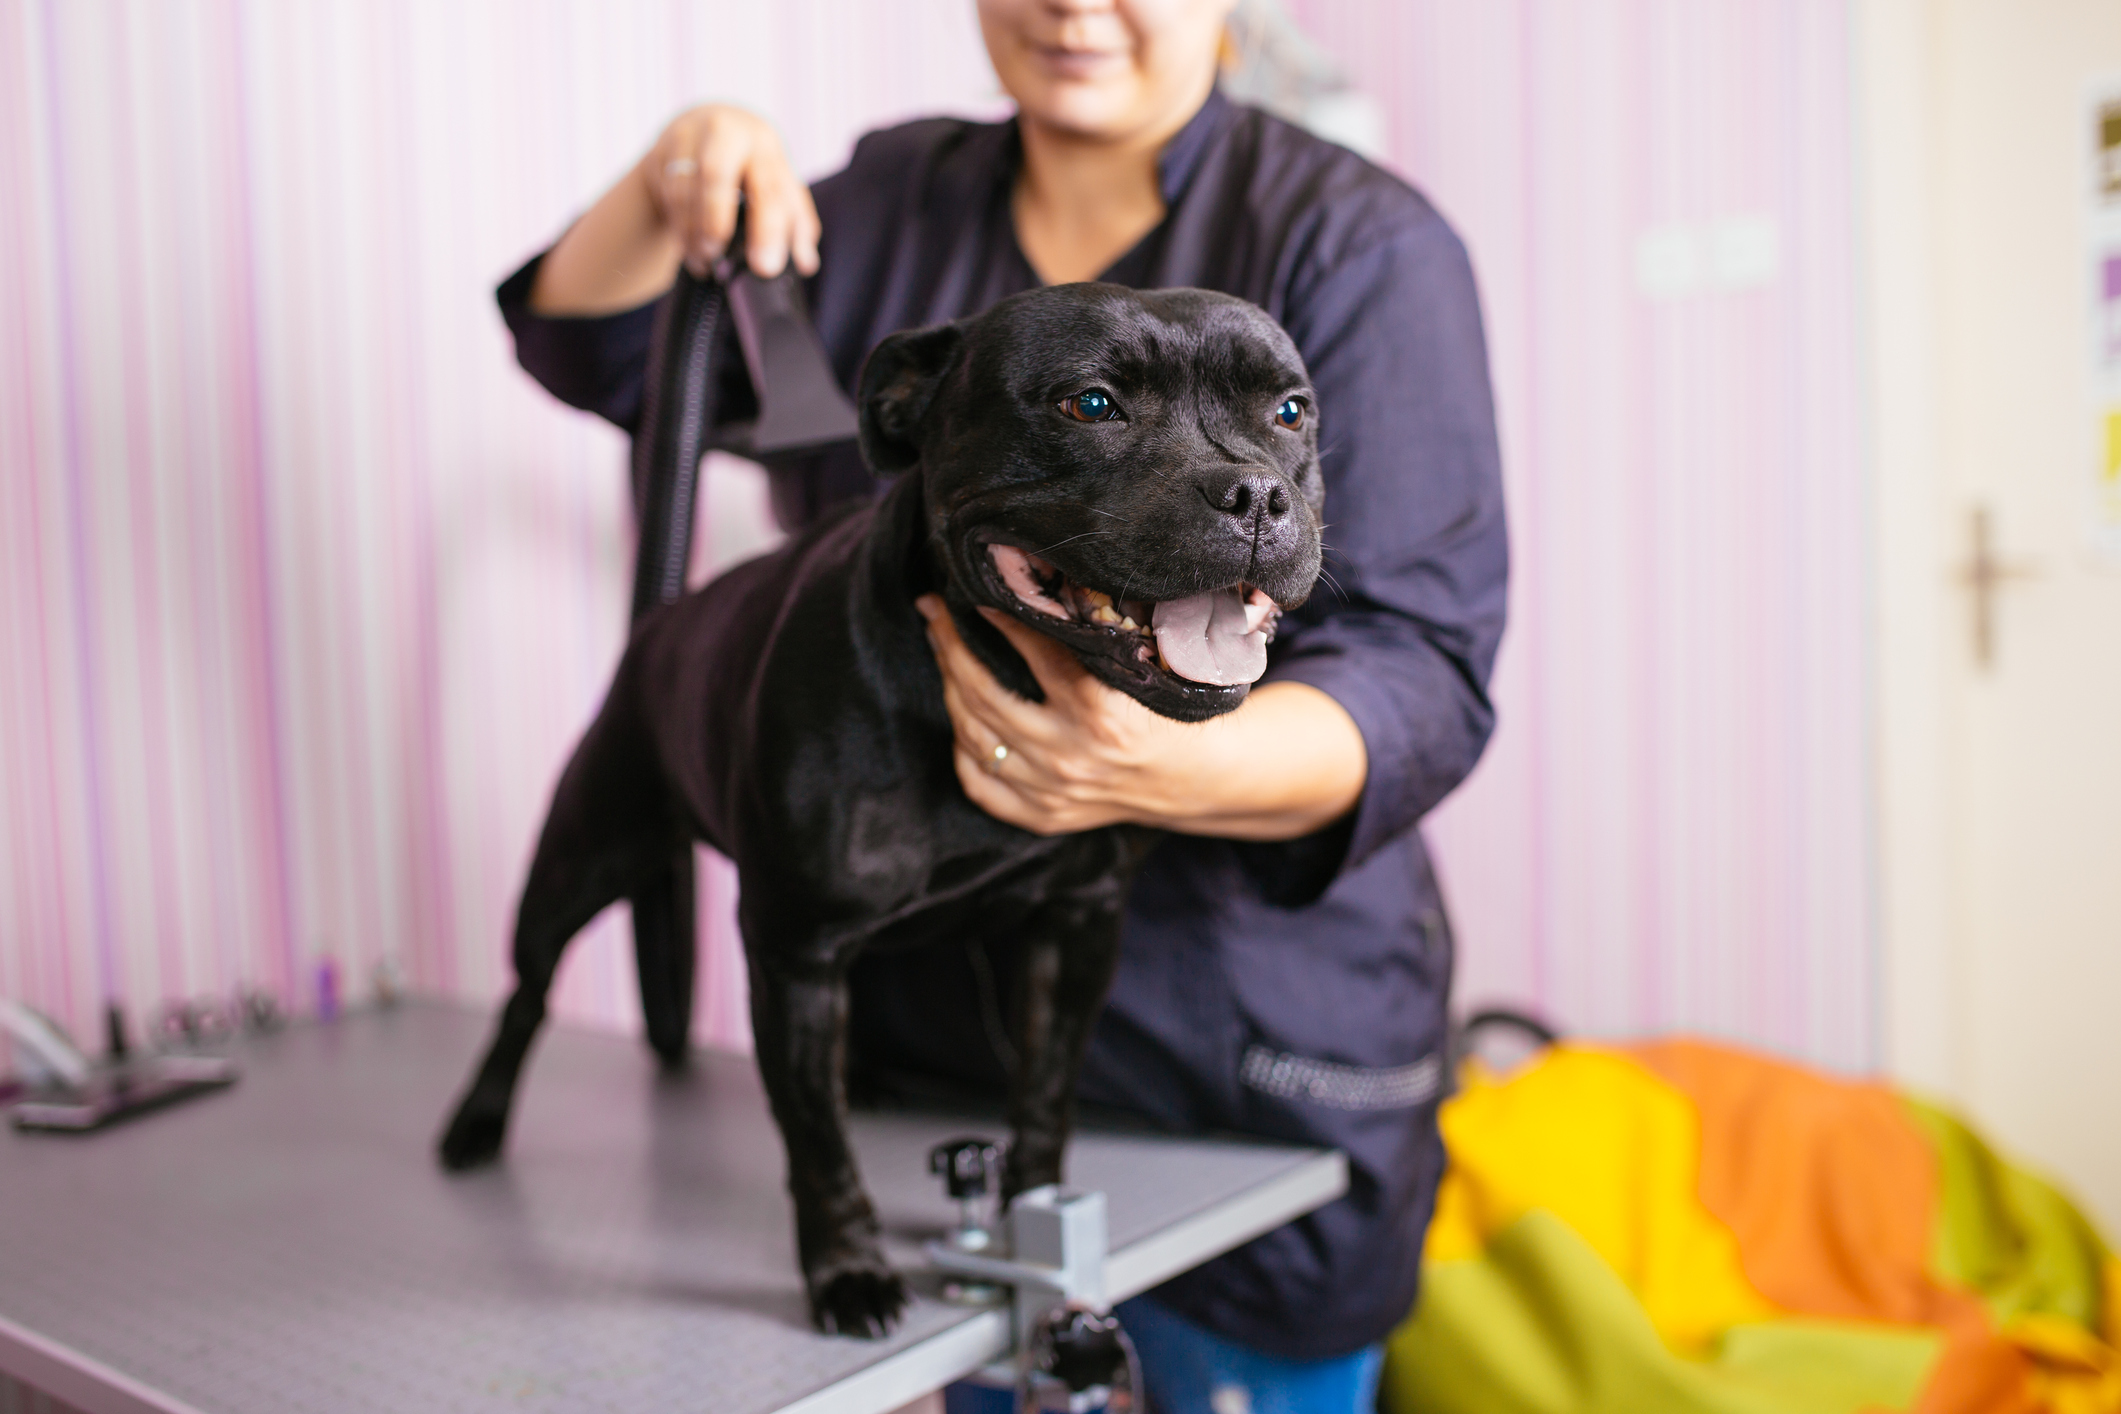 Dog grooming process. Black American Stafford terrier sits on the table while being brushed and styled by a professional groomer.